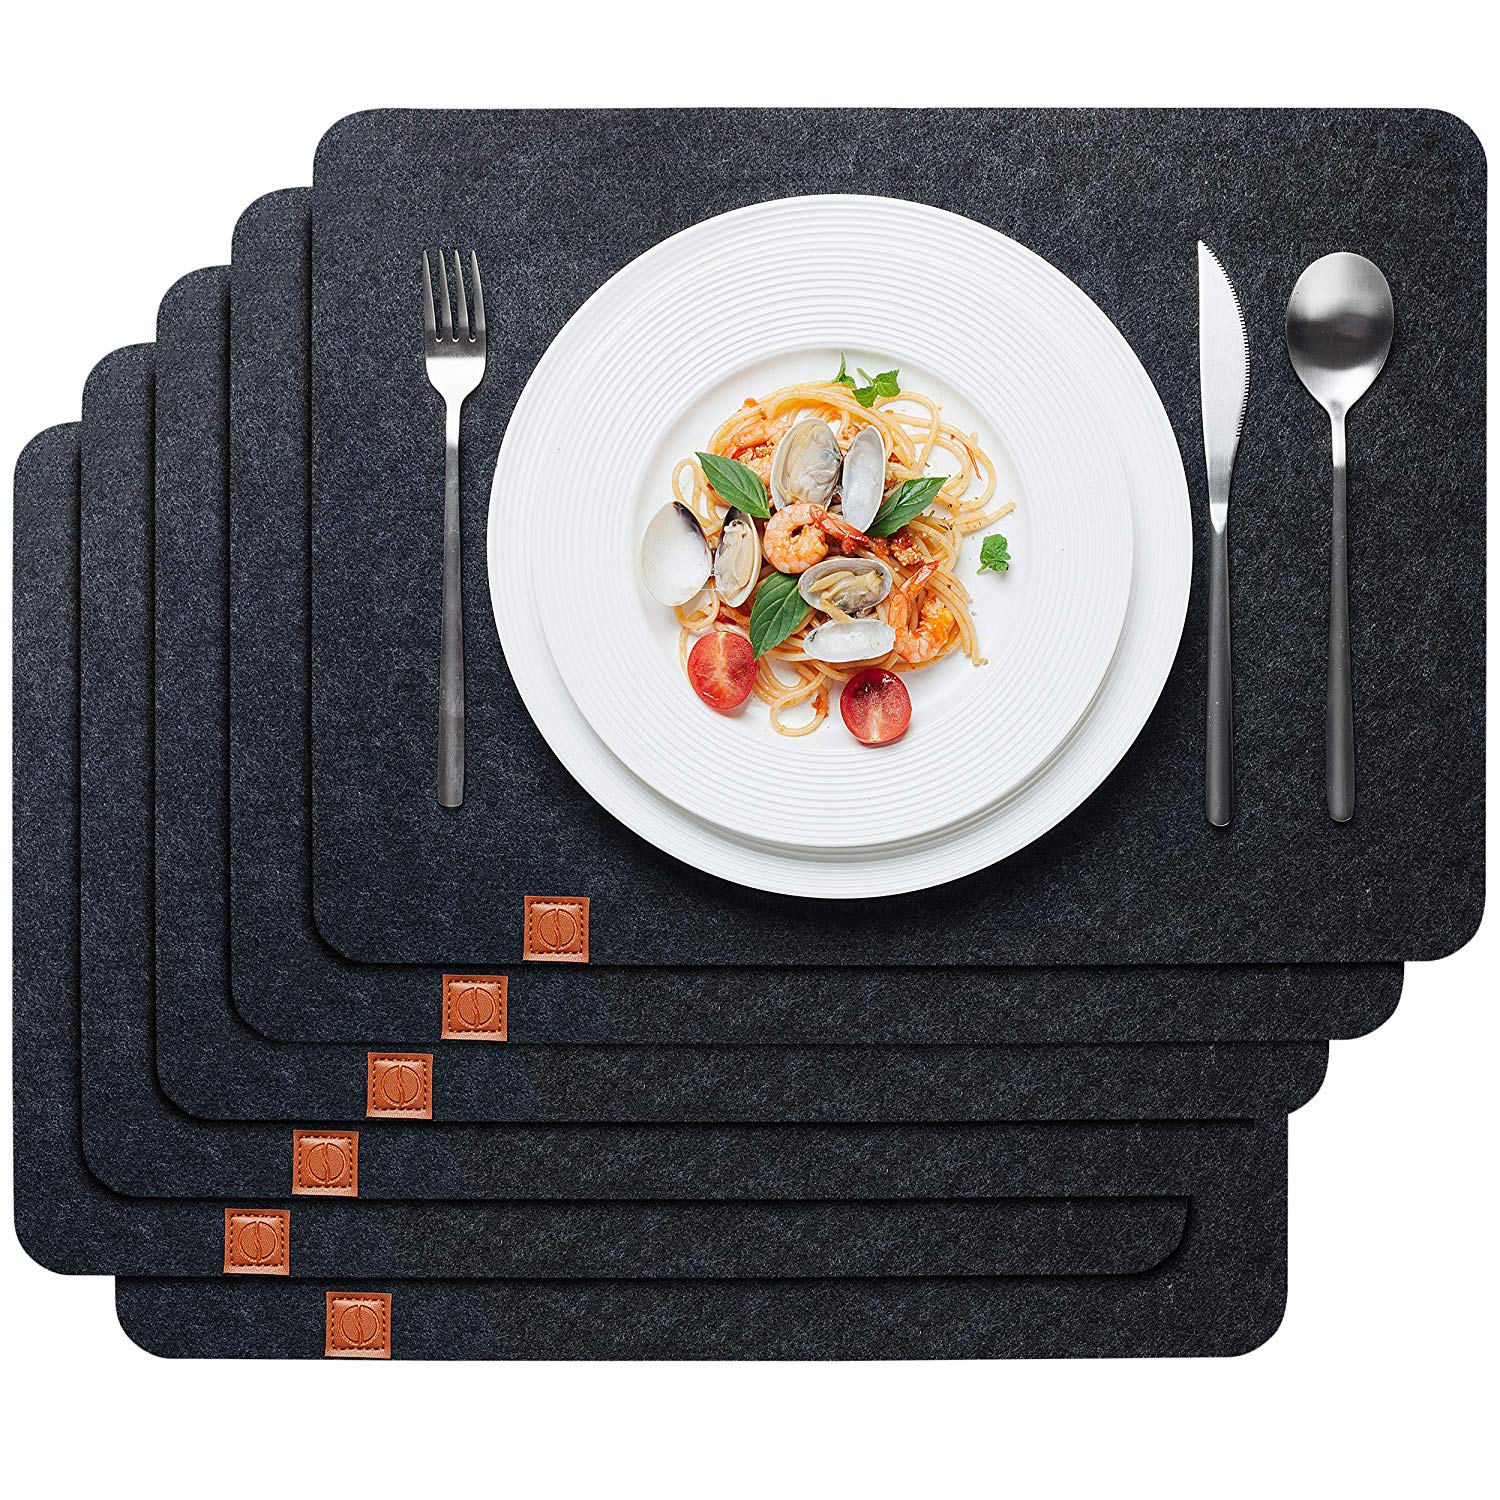 Eco-friendly felt placemat hot sale in Europe Featured Image